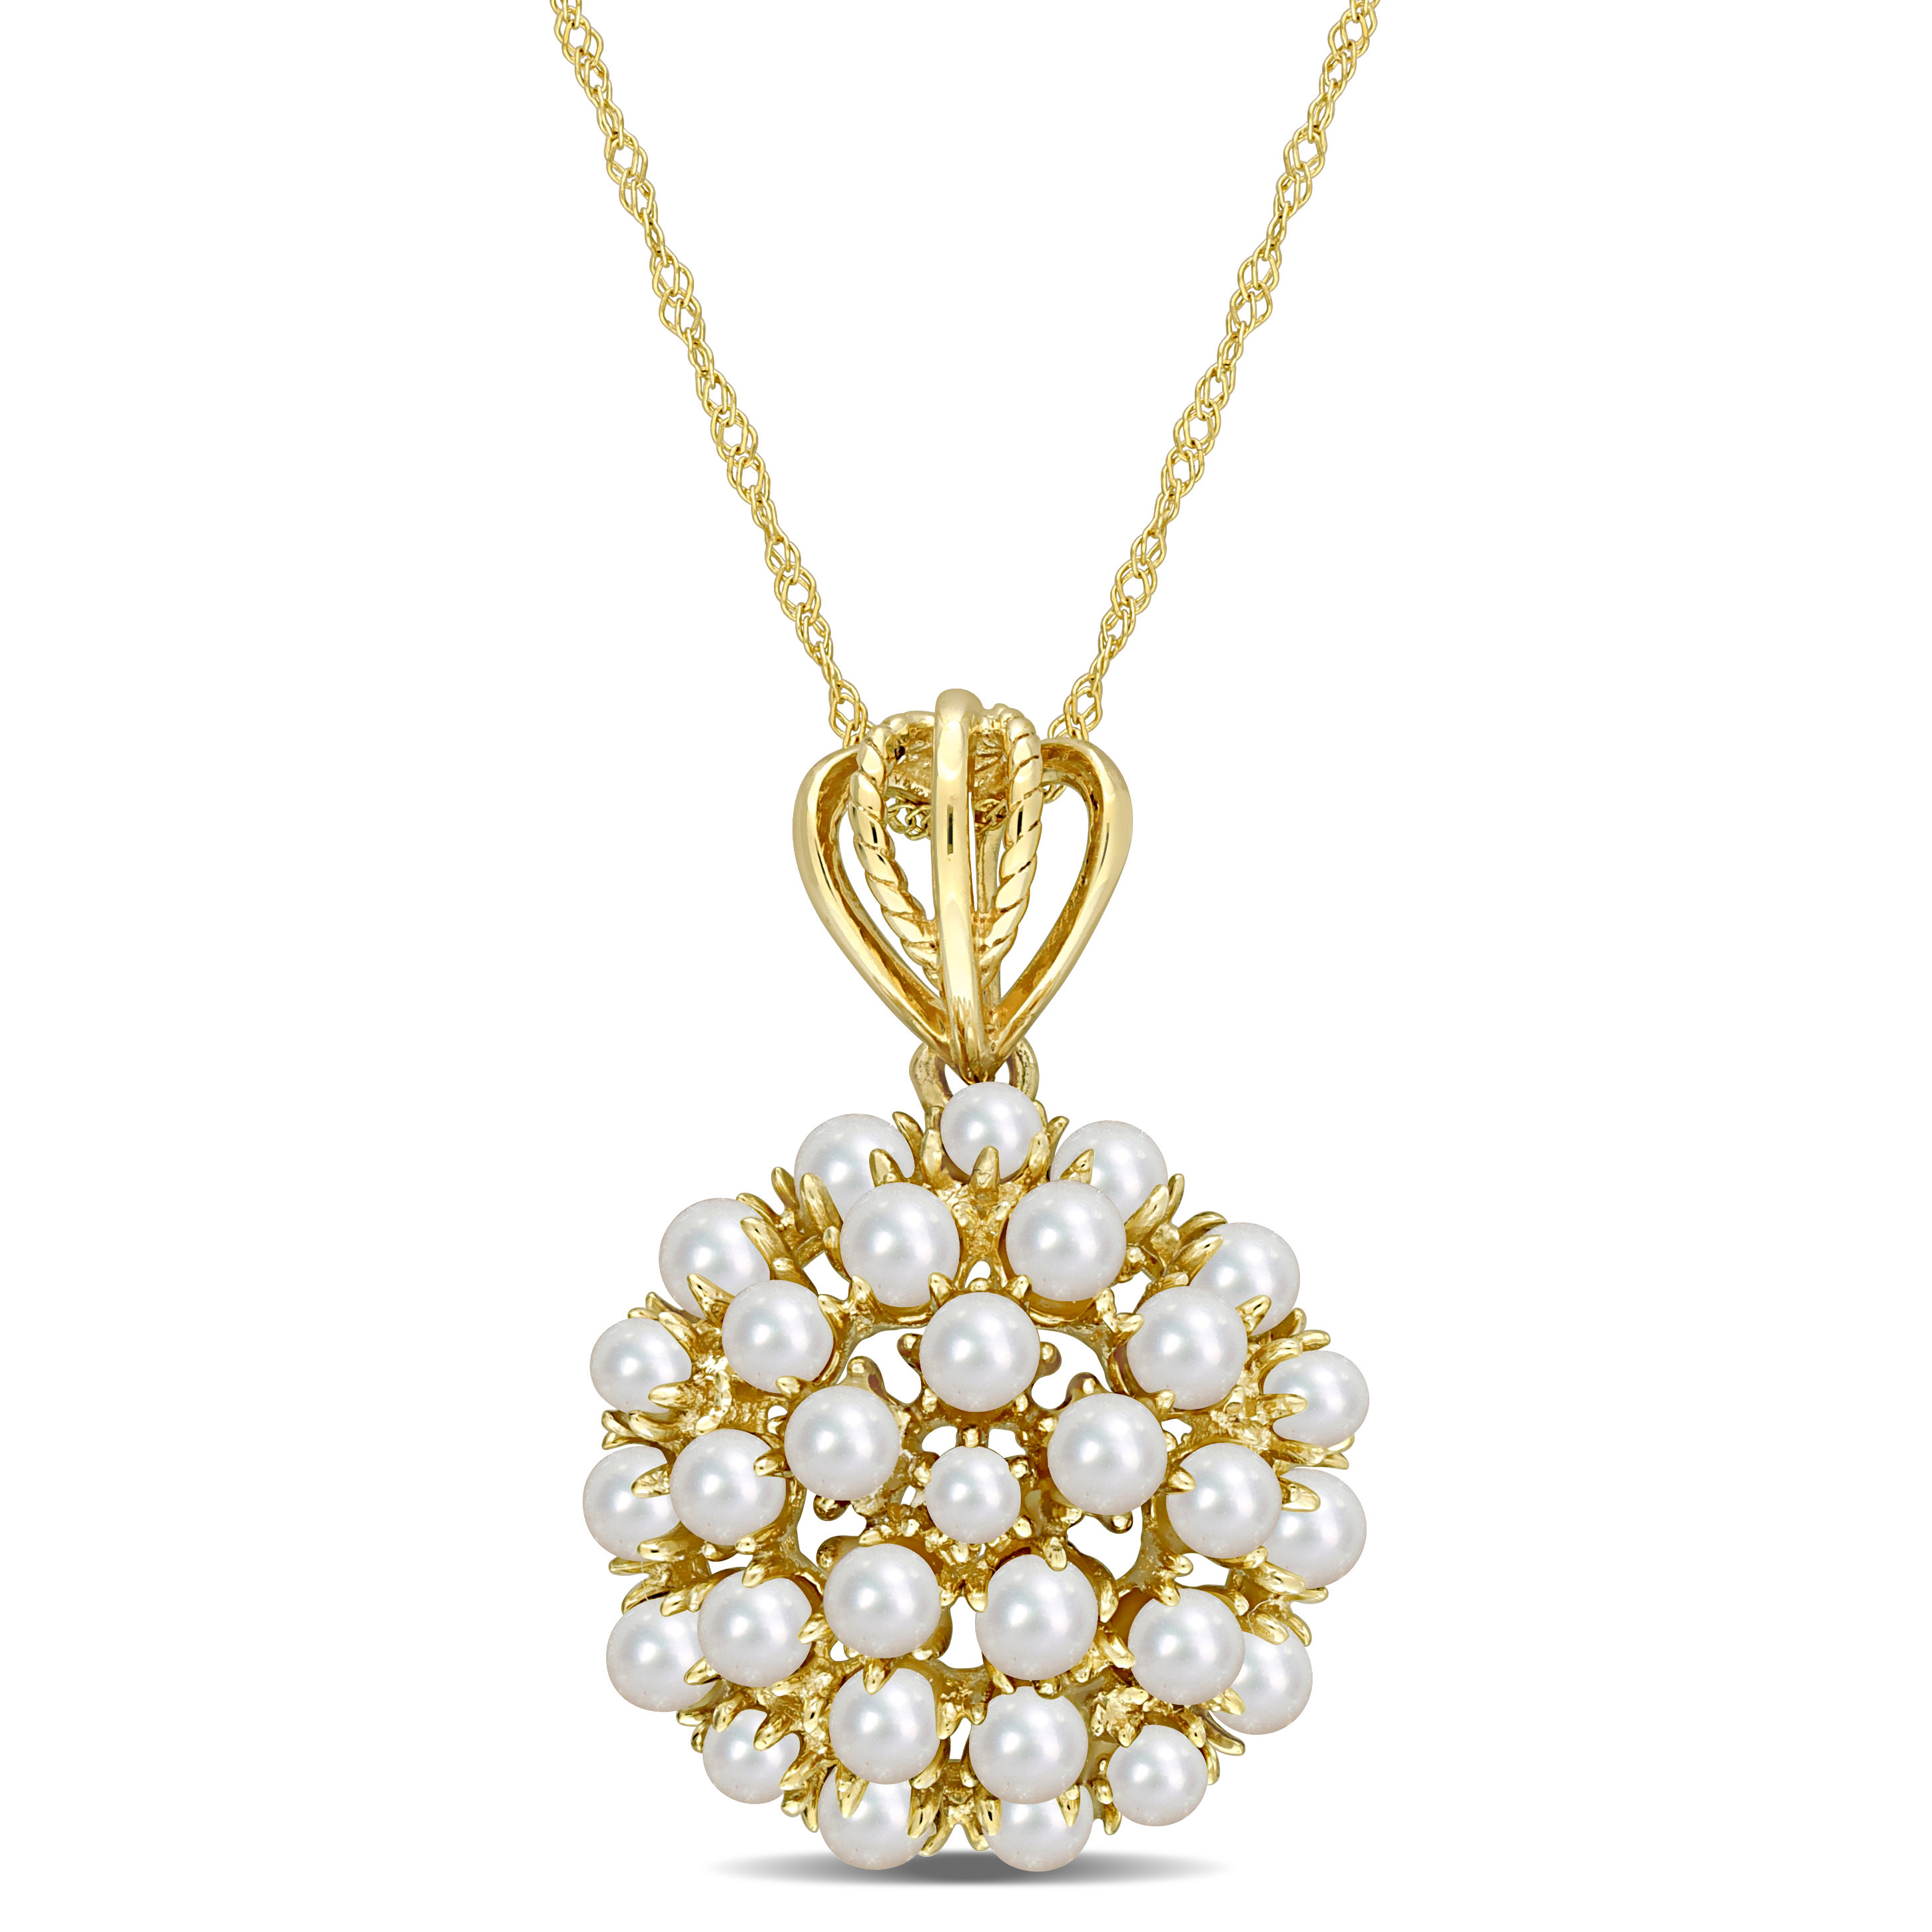 2.5-3 MM Freshwater Cultured Pearl Floral Cluster Pendant with Chain in 10k Yellow Gold